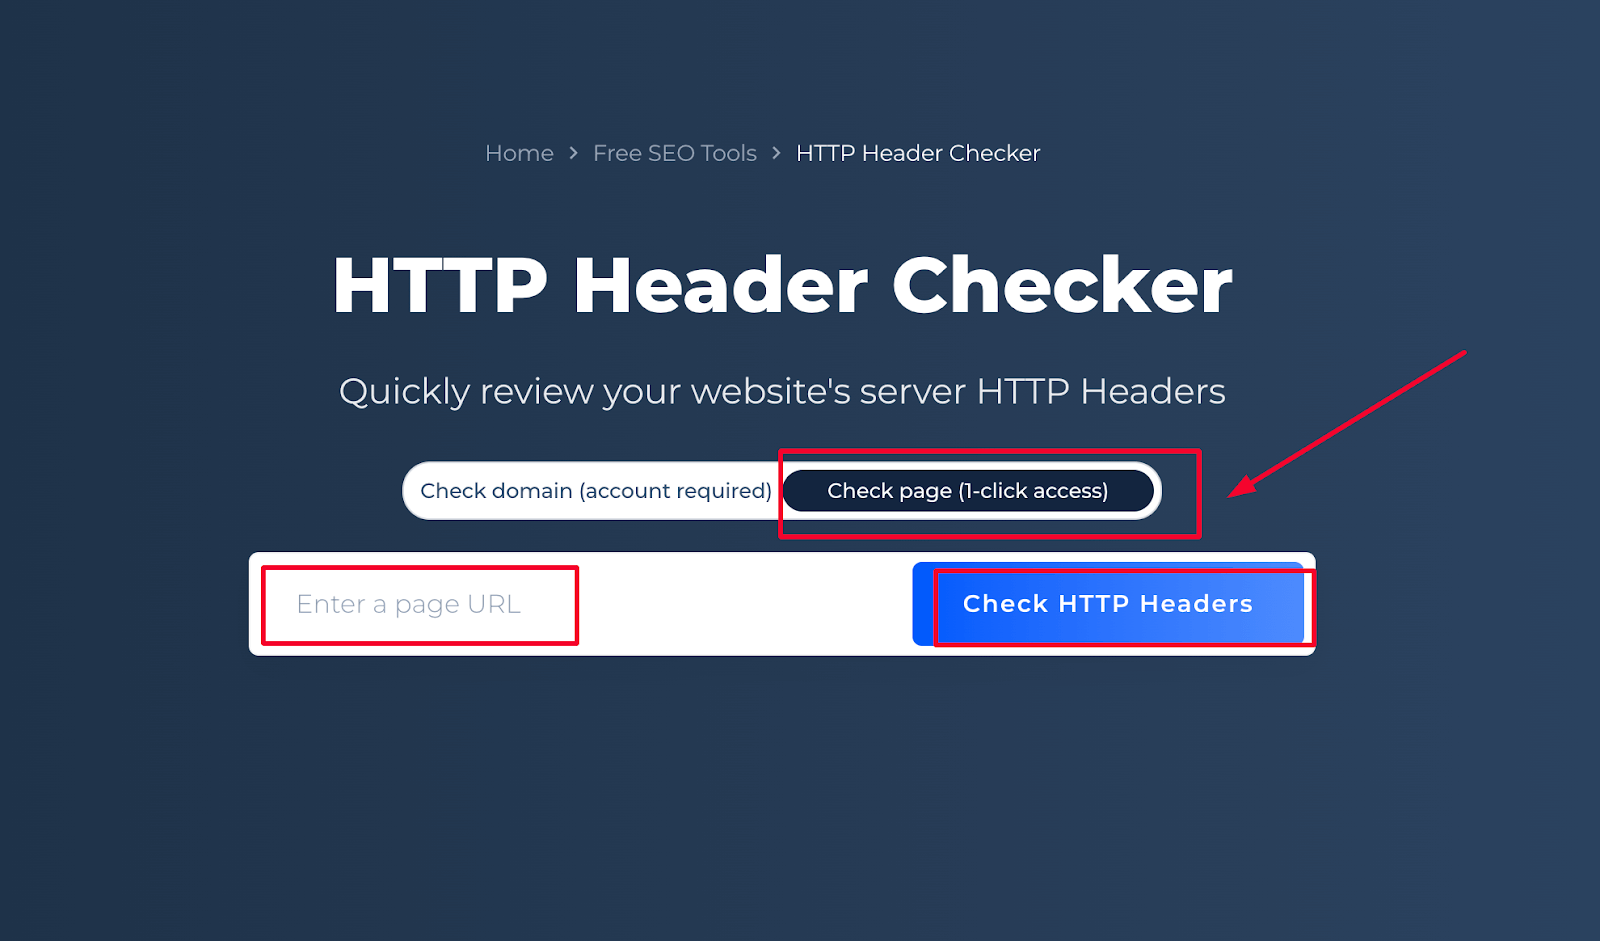 HTTP Header Checker Page